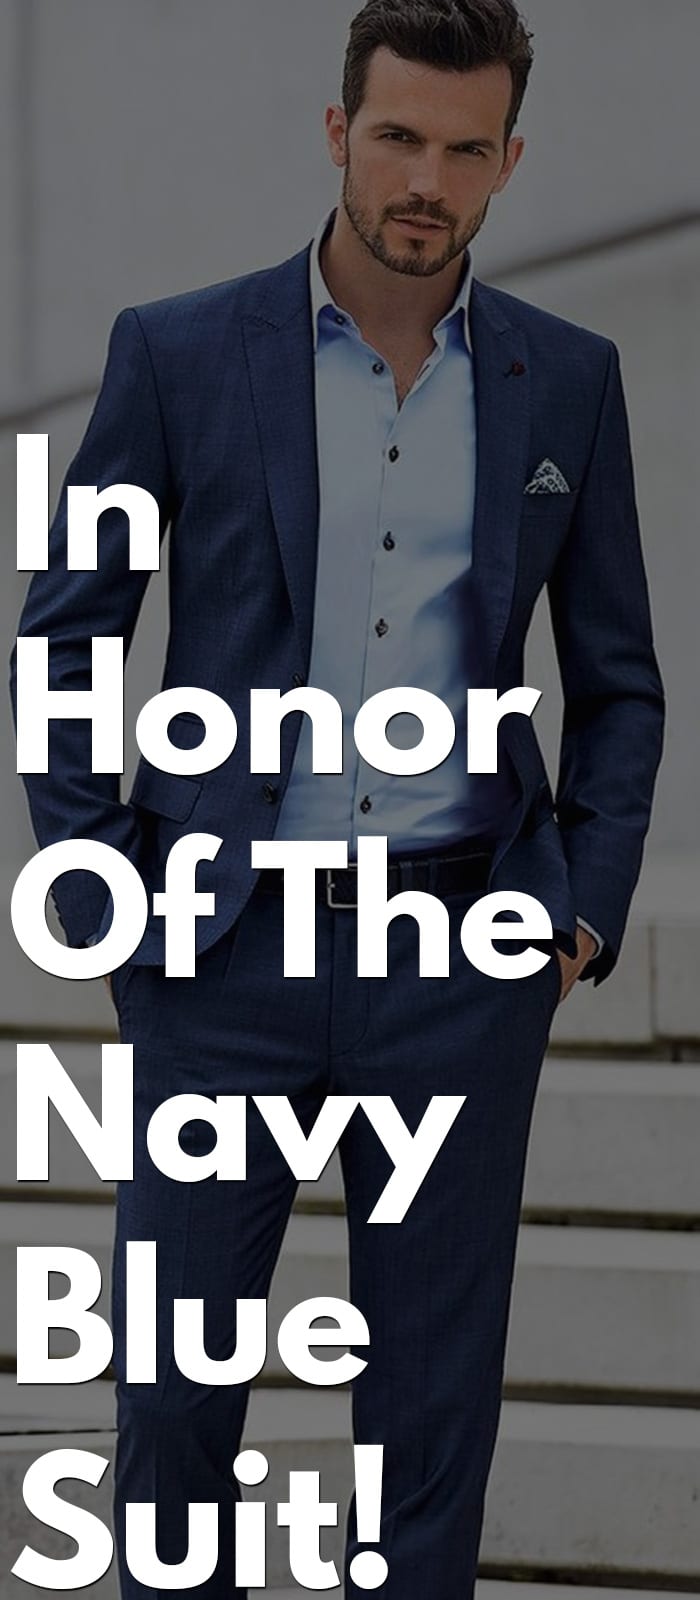 In Honor Of The Navy Blue Suit!